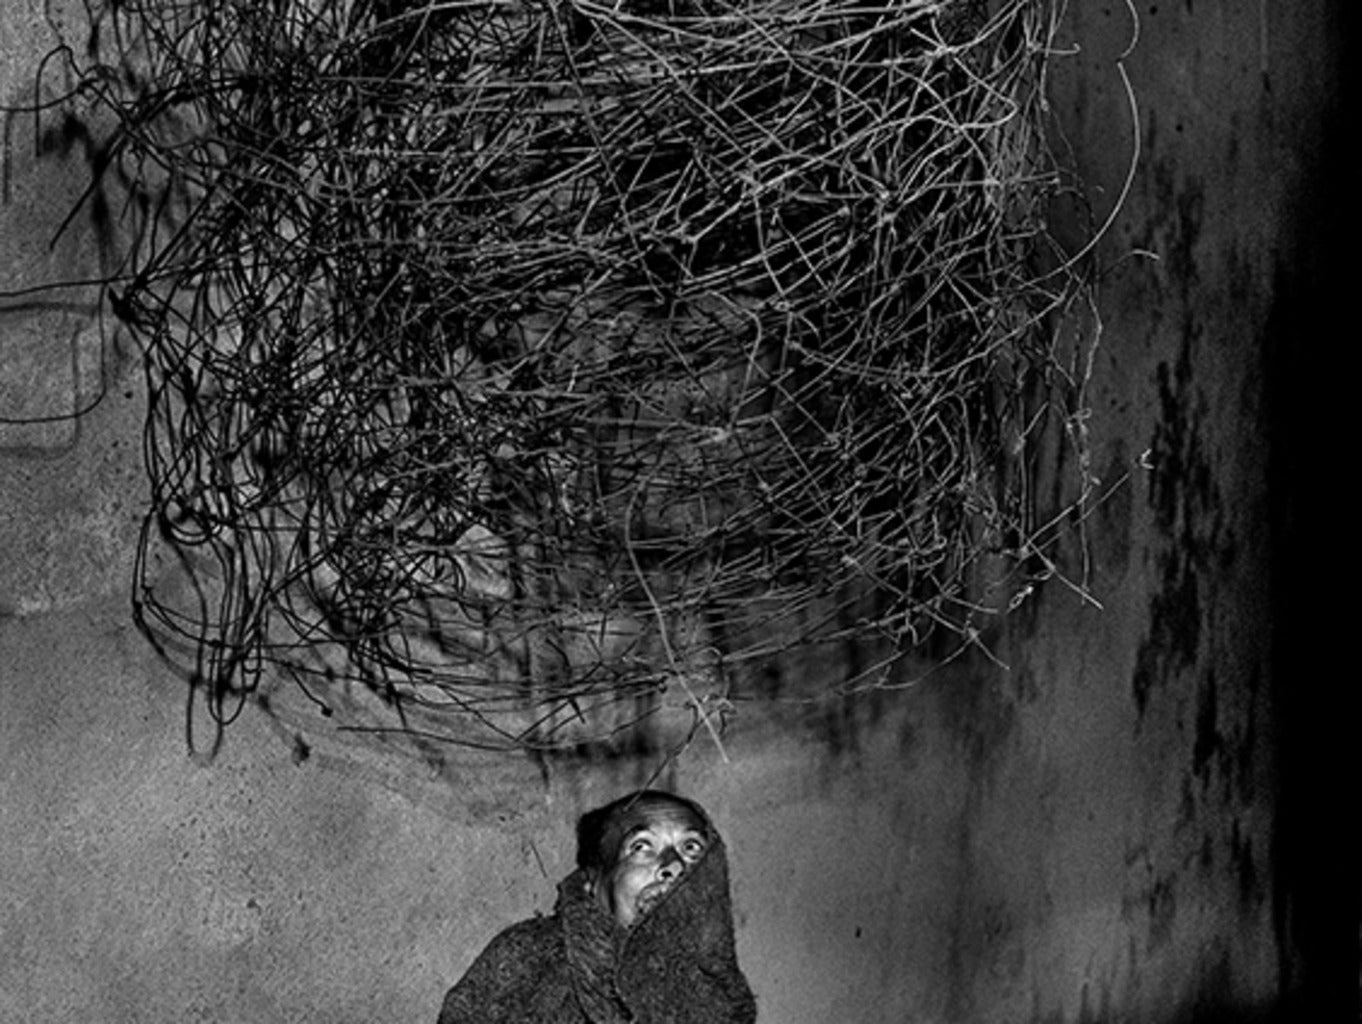 ROGER BALLEN: LINES, MARKINGS, AND DRAWINGS